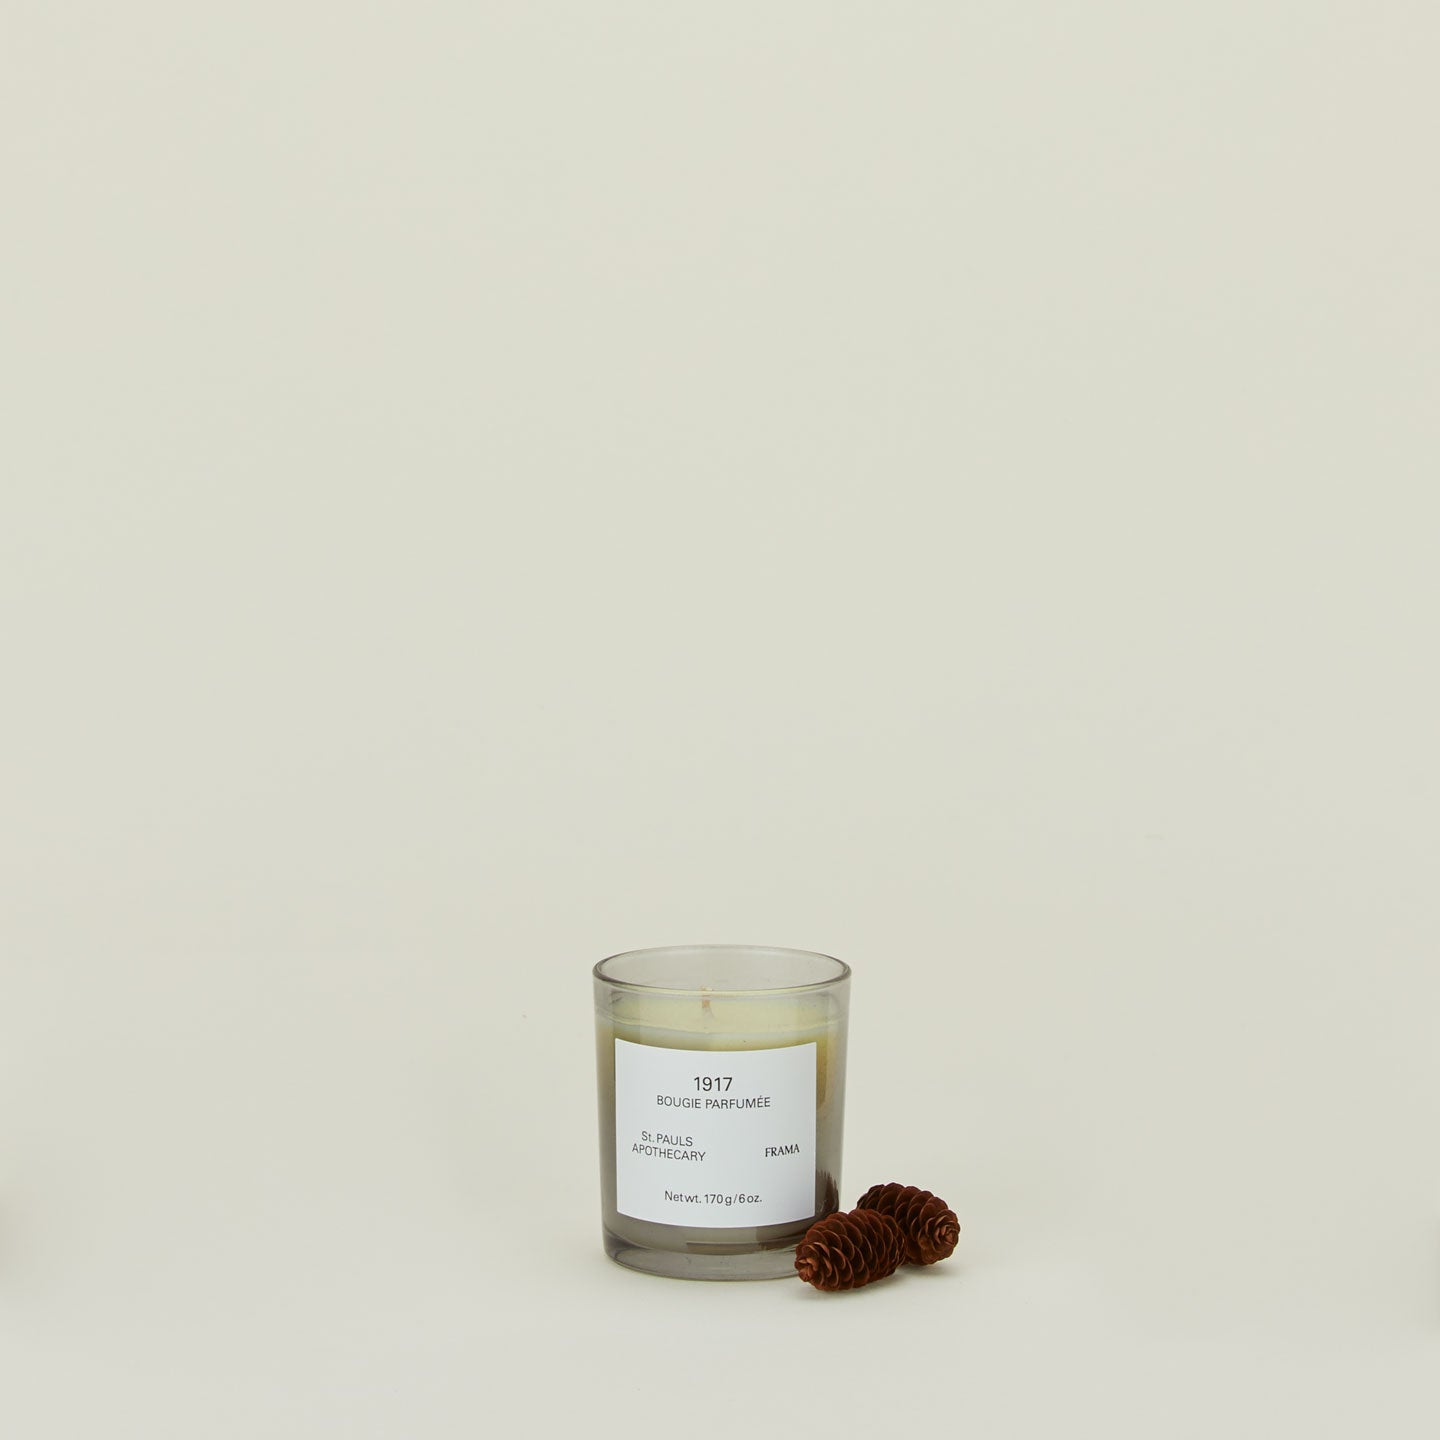 A wax candle with the scent 1917, with dried florals.